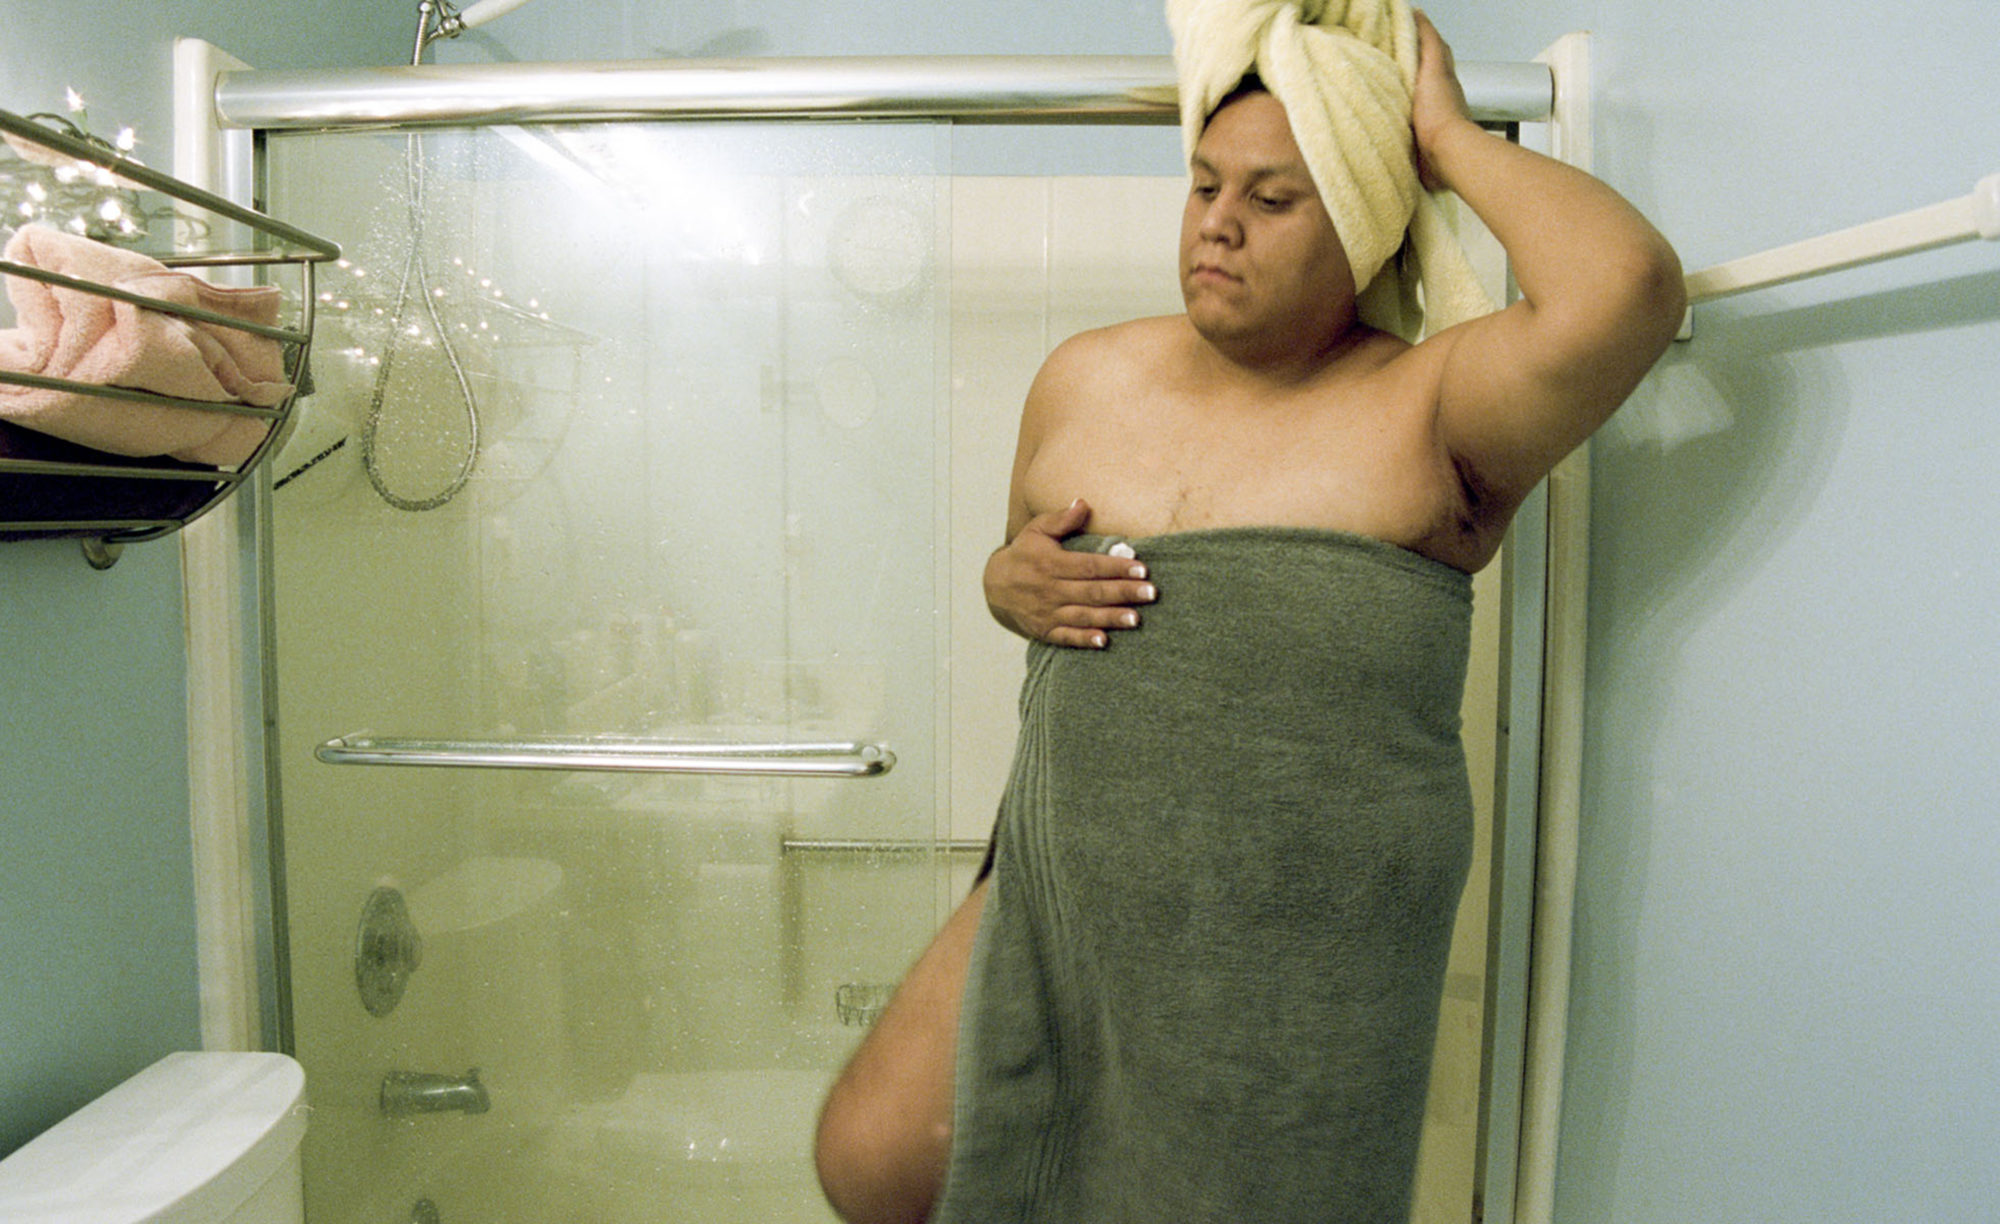 A person in a towel, getting out of the shower